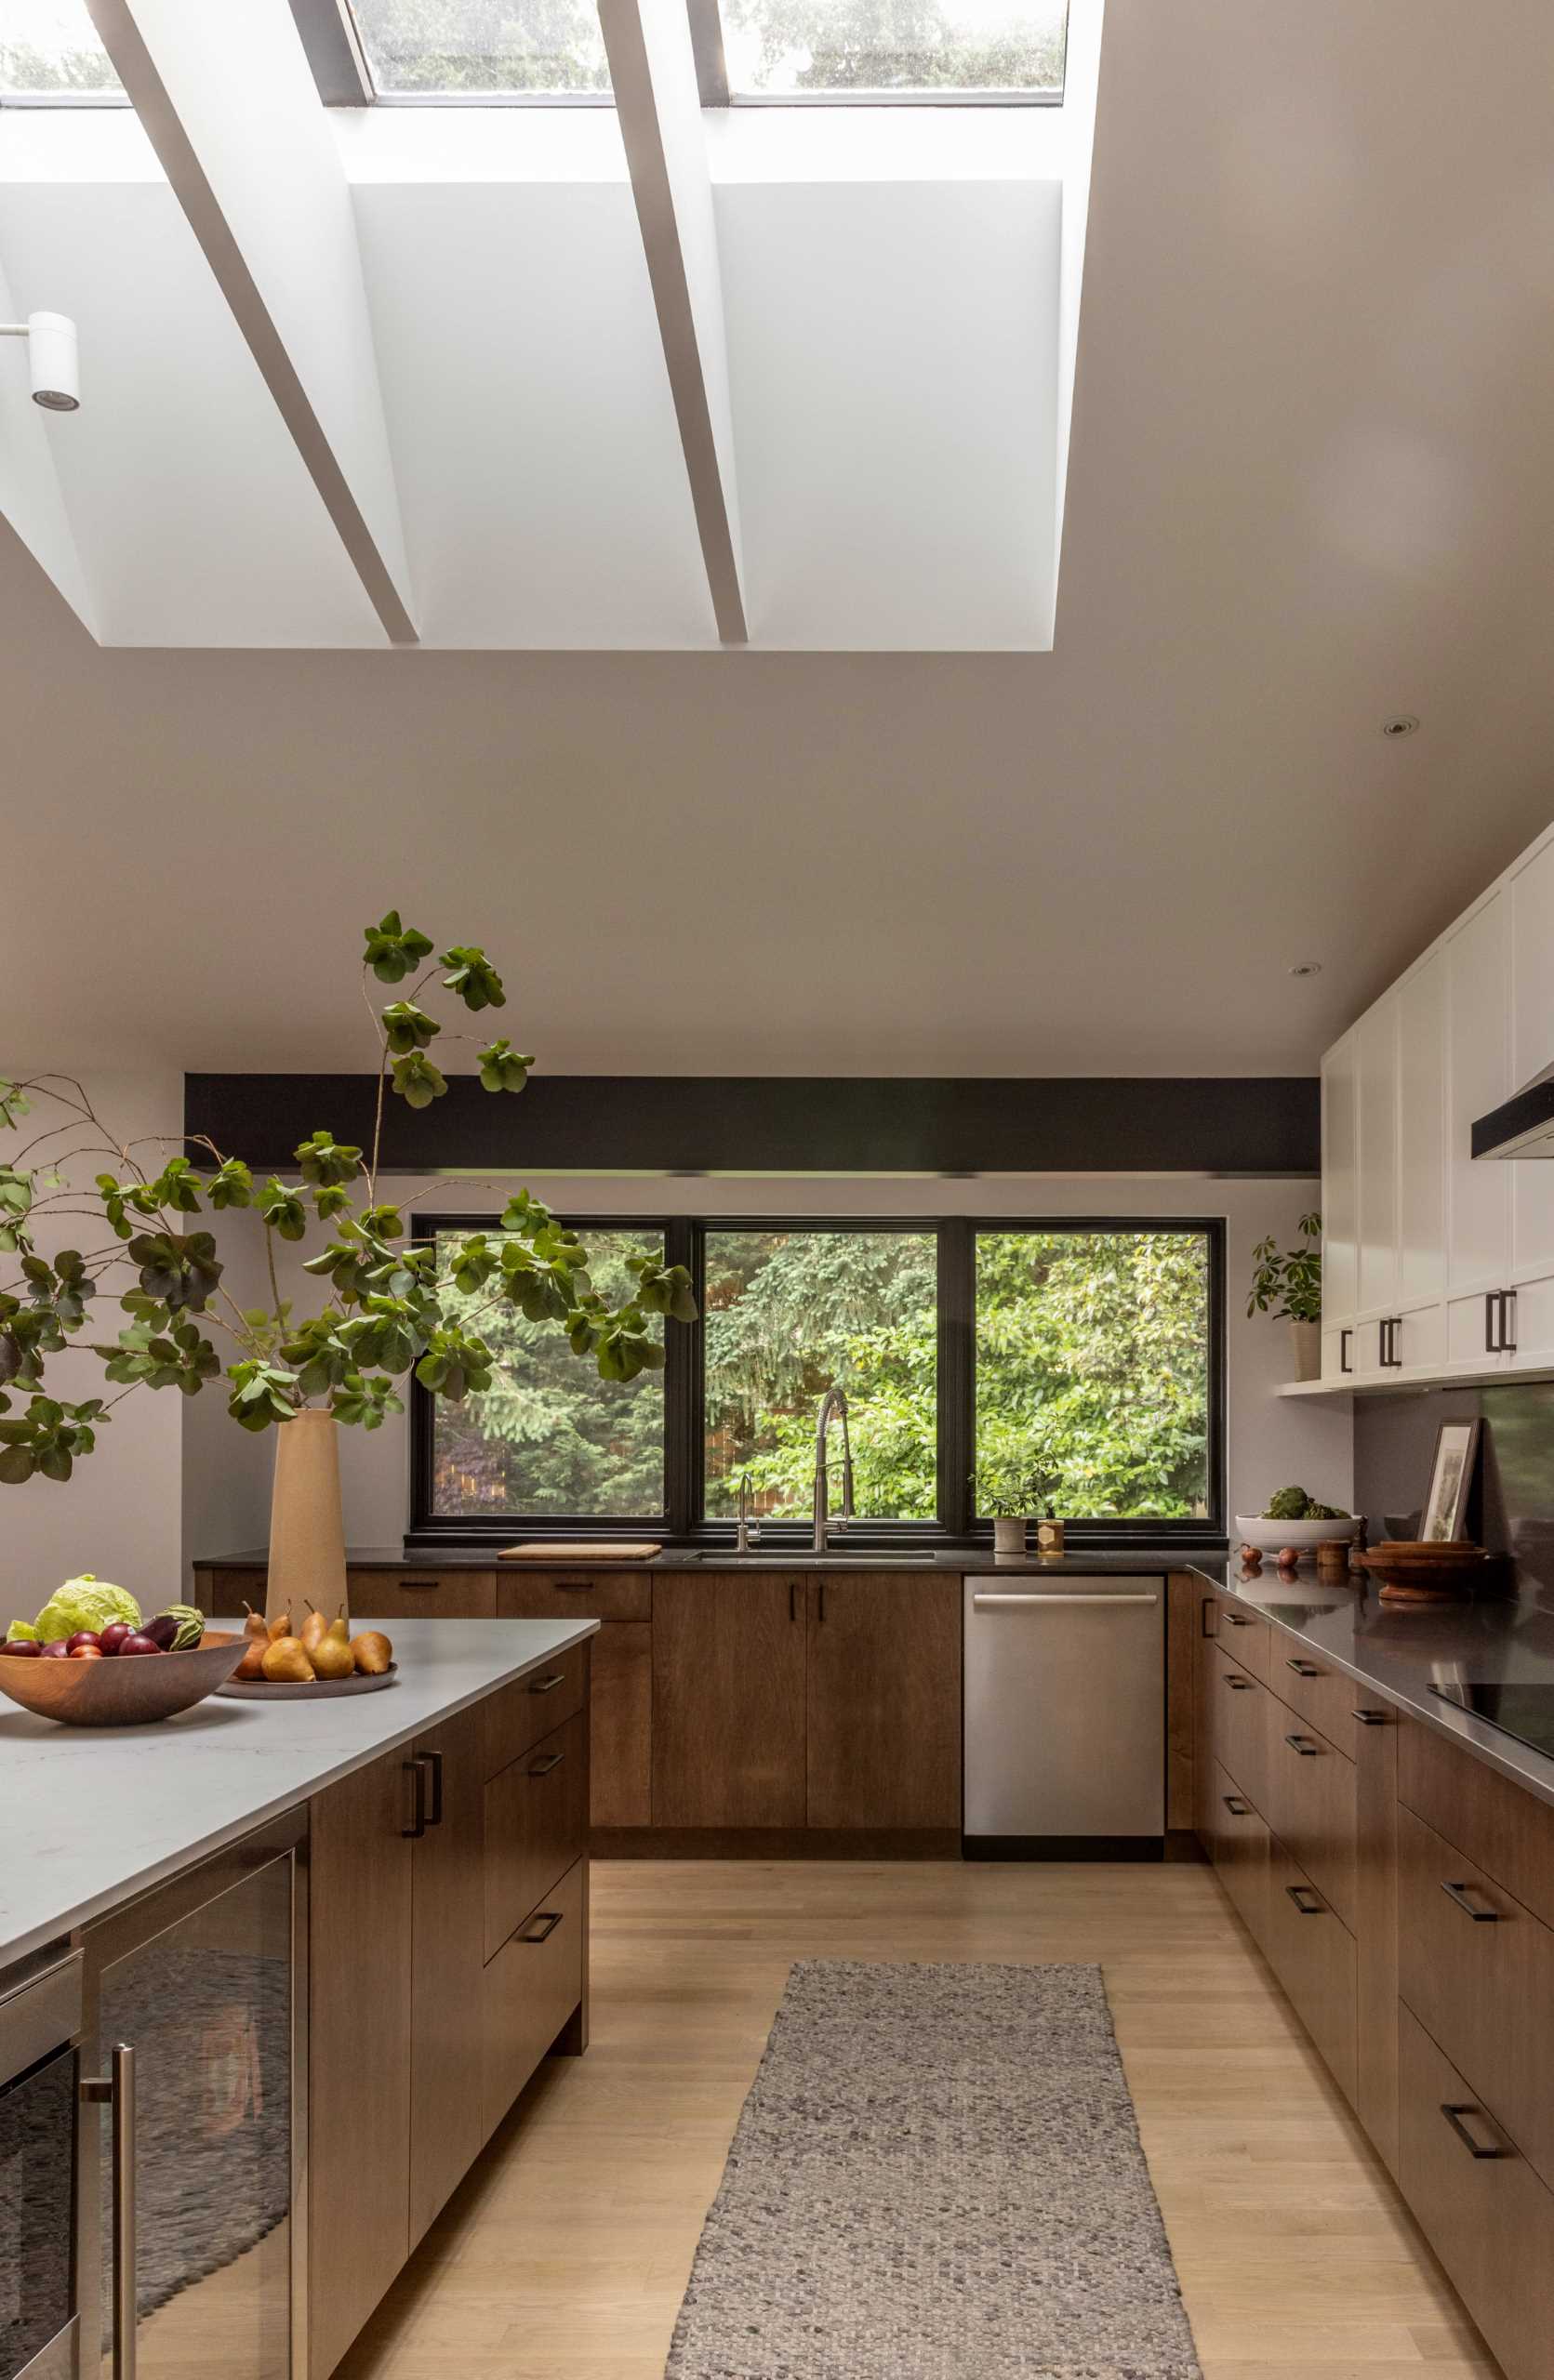 A modern kitchen with wood and white cabinets, black window frames, an island, and a skylight.